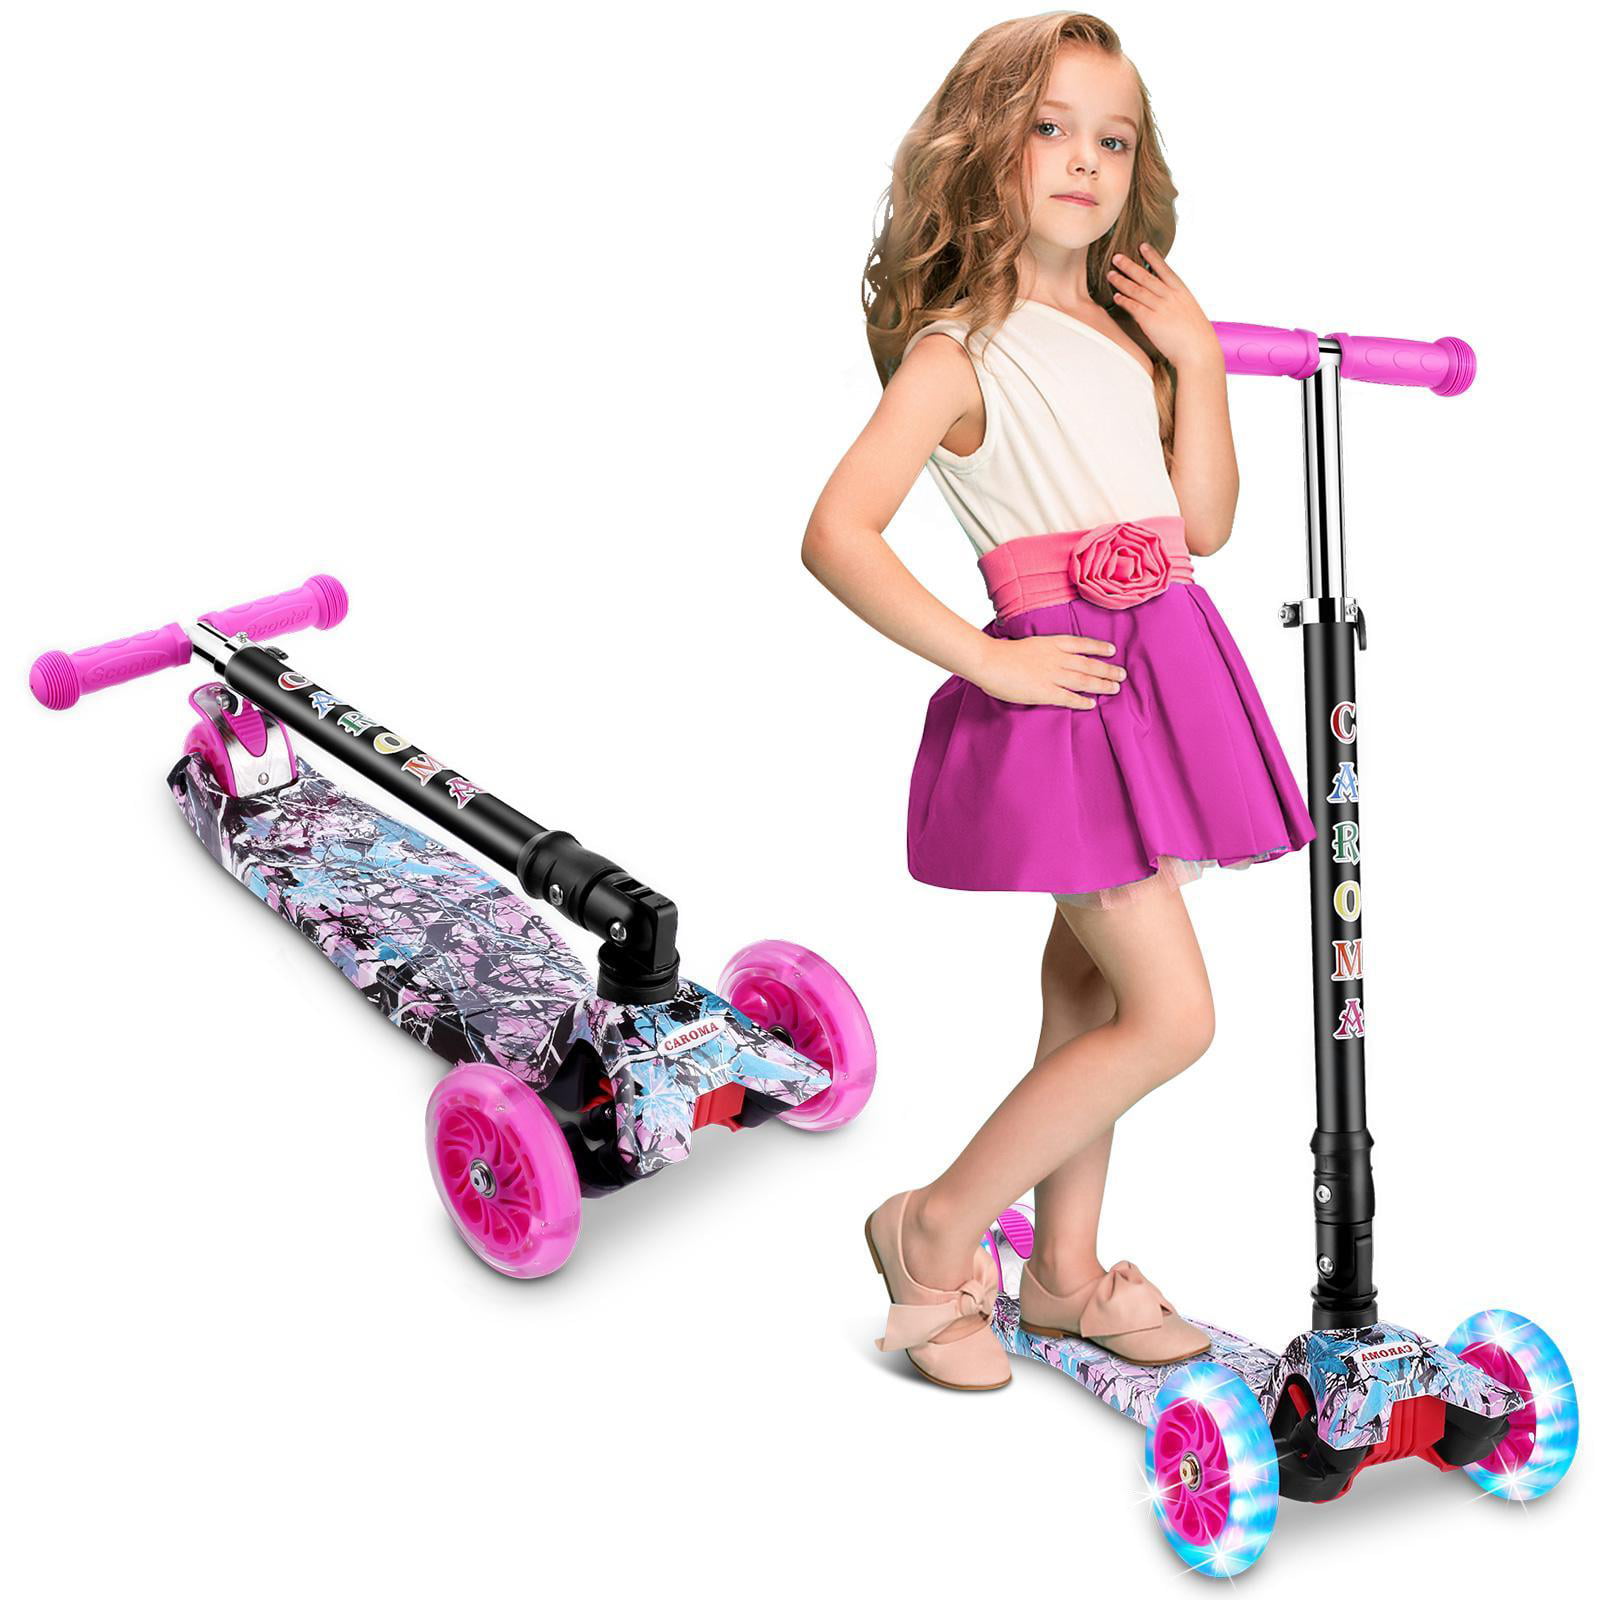 Window-pick@BB Folding Children Scooter 3 Wheel Kick Scooter with One Second Folding with Music Multi-Function Graffiti Flash 4 Height Adjustable Scooter for Children from 2 to 14